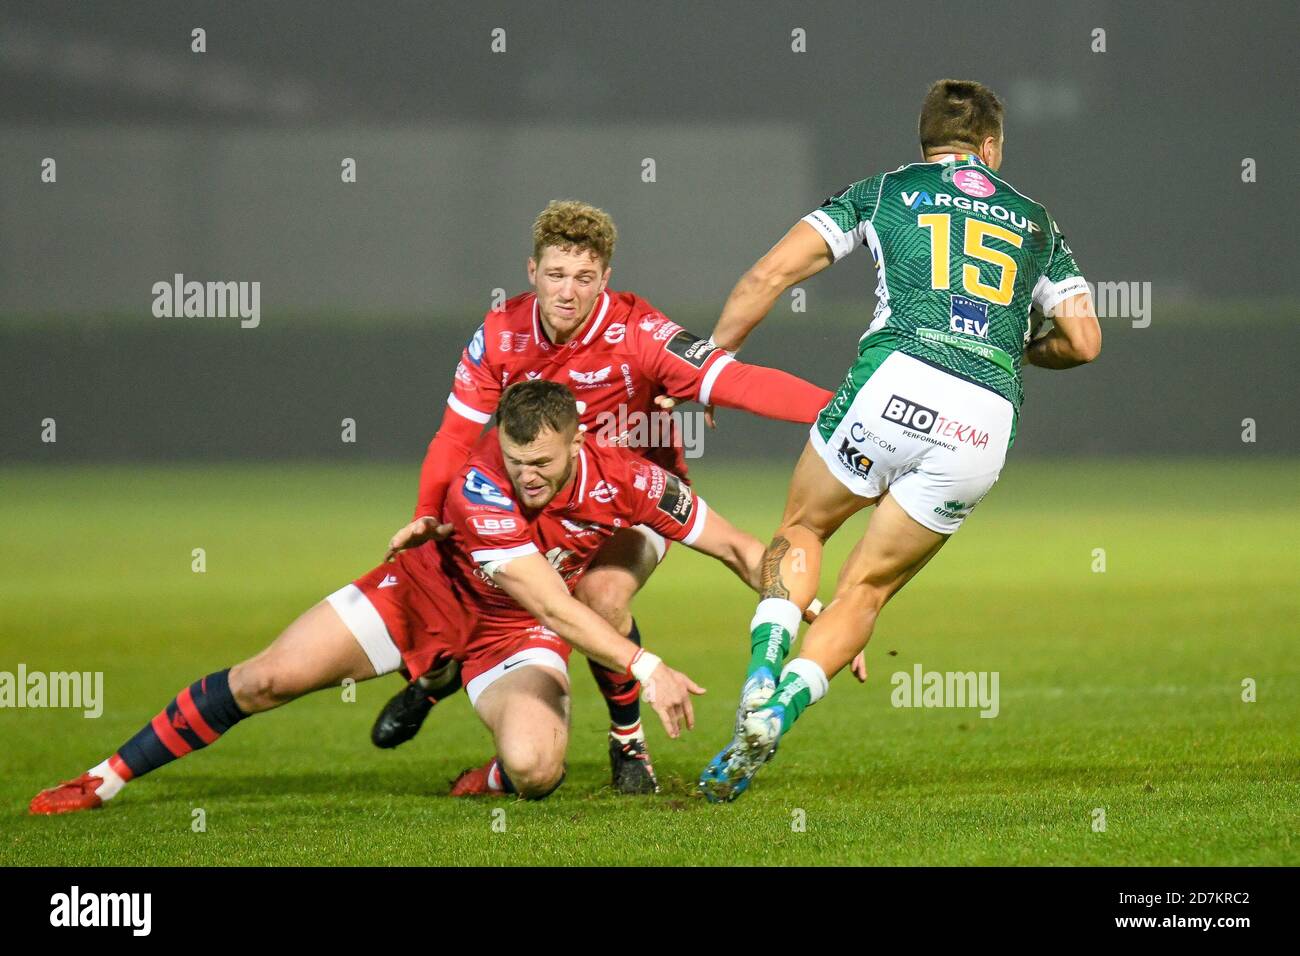 Stadio Comunale di Monigo, Treviso, Italy, 23 Oct 2020, Luca Sperandio  (Treviso) tackled by Steff Hughes (Scarlets) during Benetton Treviso vs  Scarlets Rugby, Rugby Guinness Pro 14 match - Credit: LM/Ettore  Griffoni/Alamy